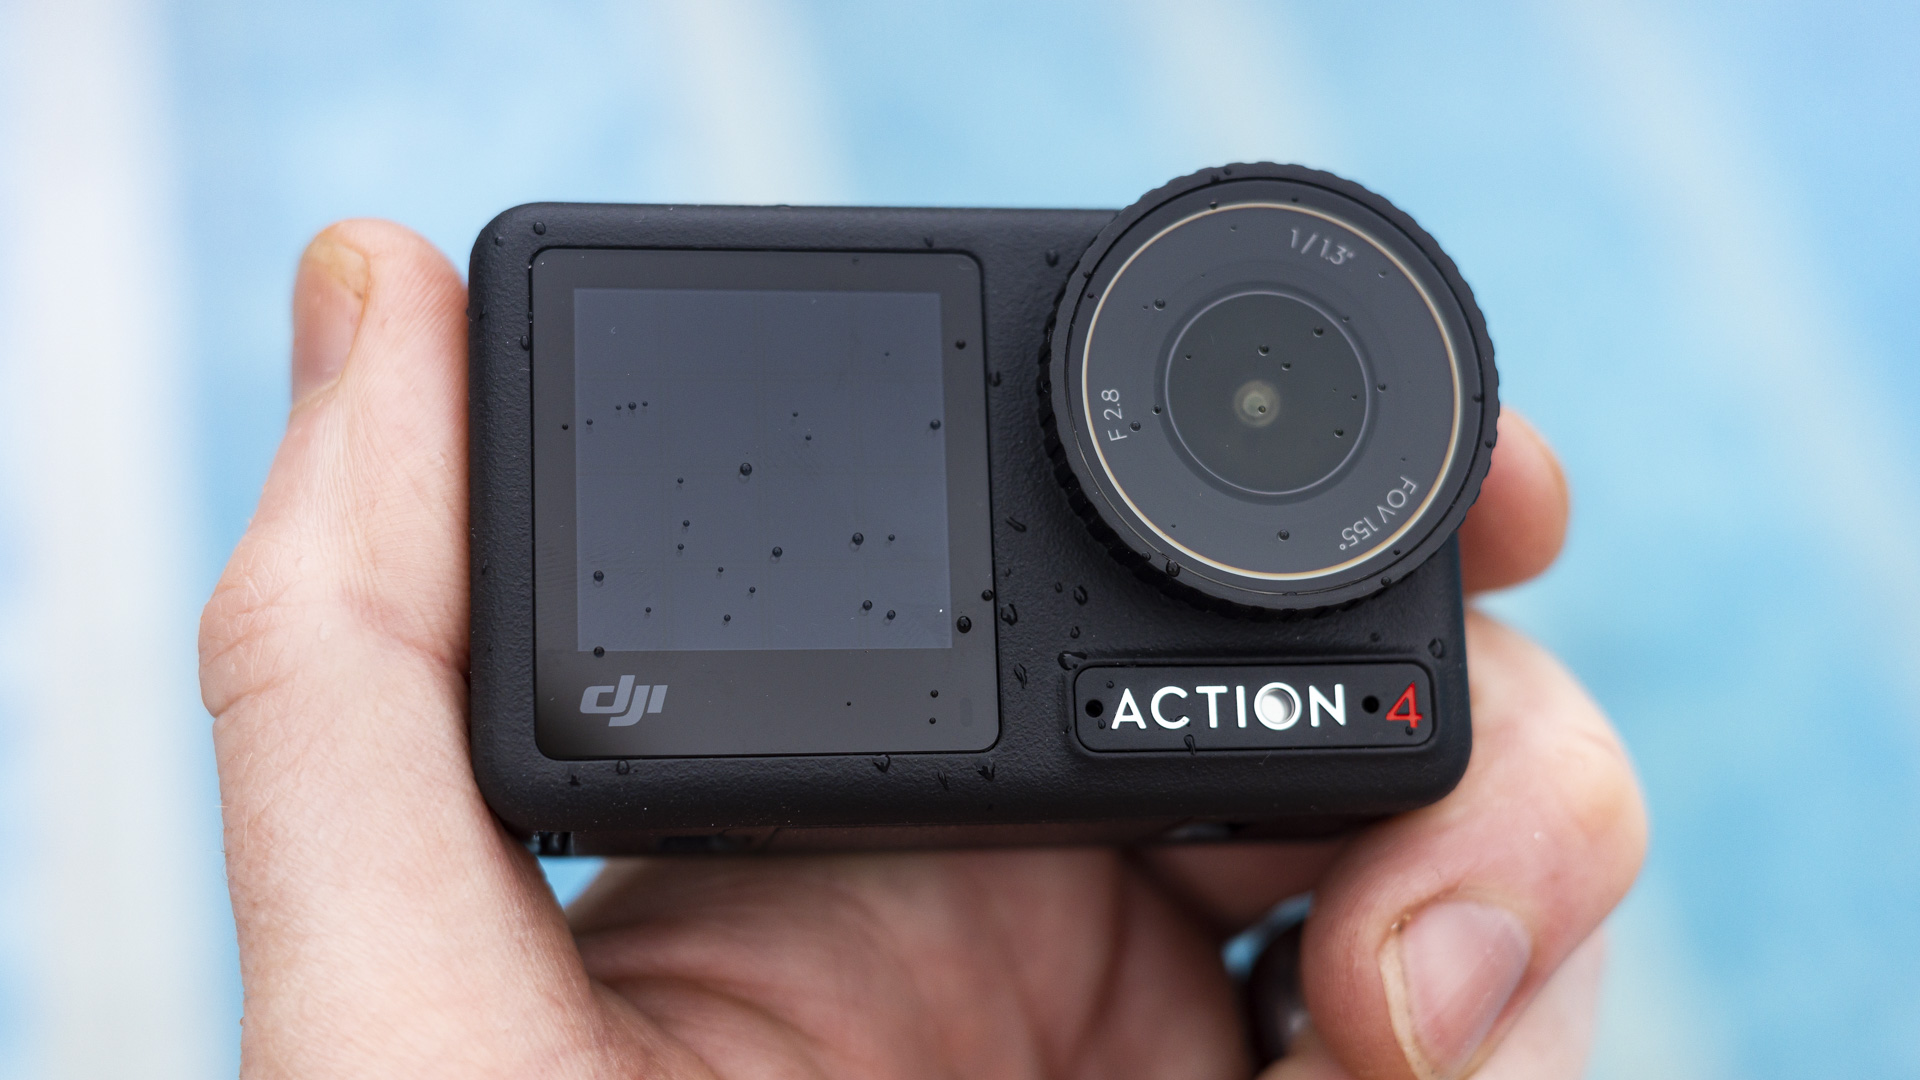 DJI Osmo Action 4 camera in the hand with swimming pool background